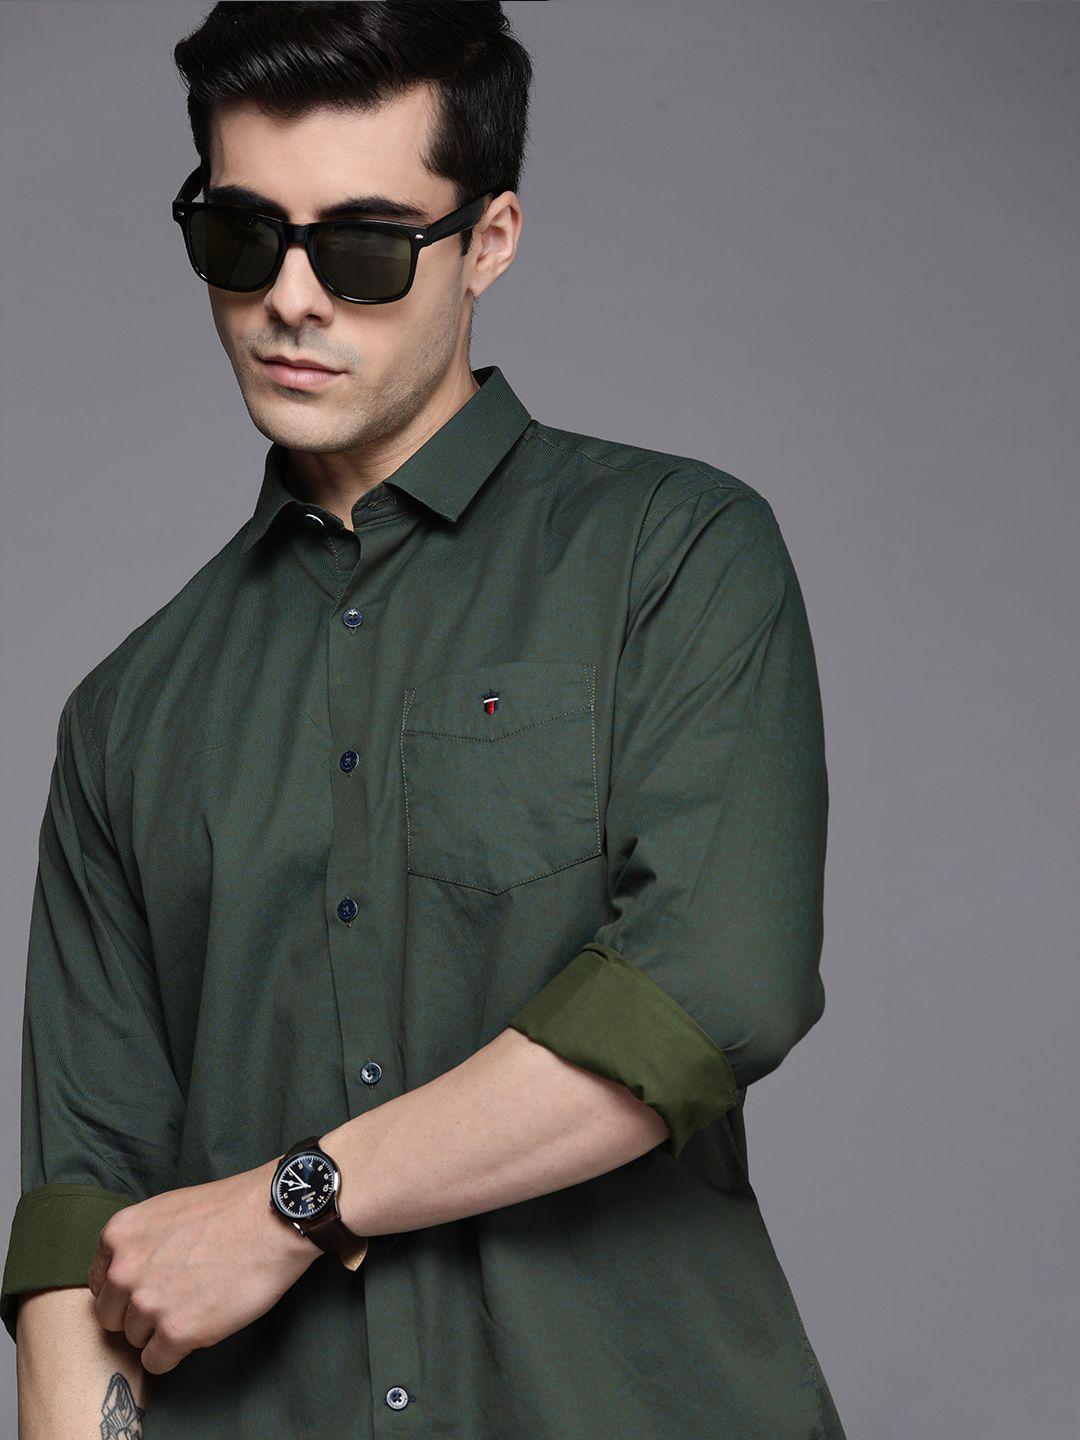 louis-philippe-sport-men-olive-green-slim-fit-geometric-printed-pure-cotton-casual-shirt